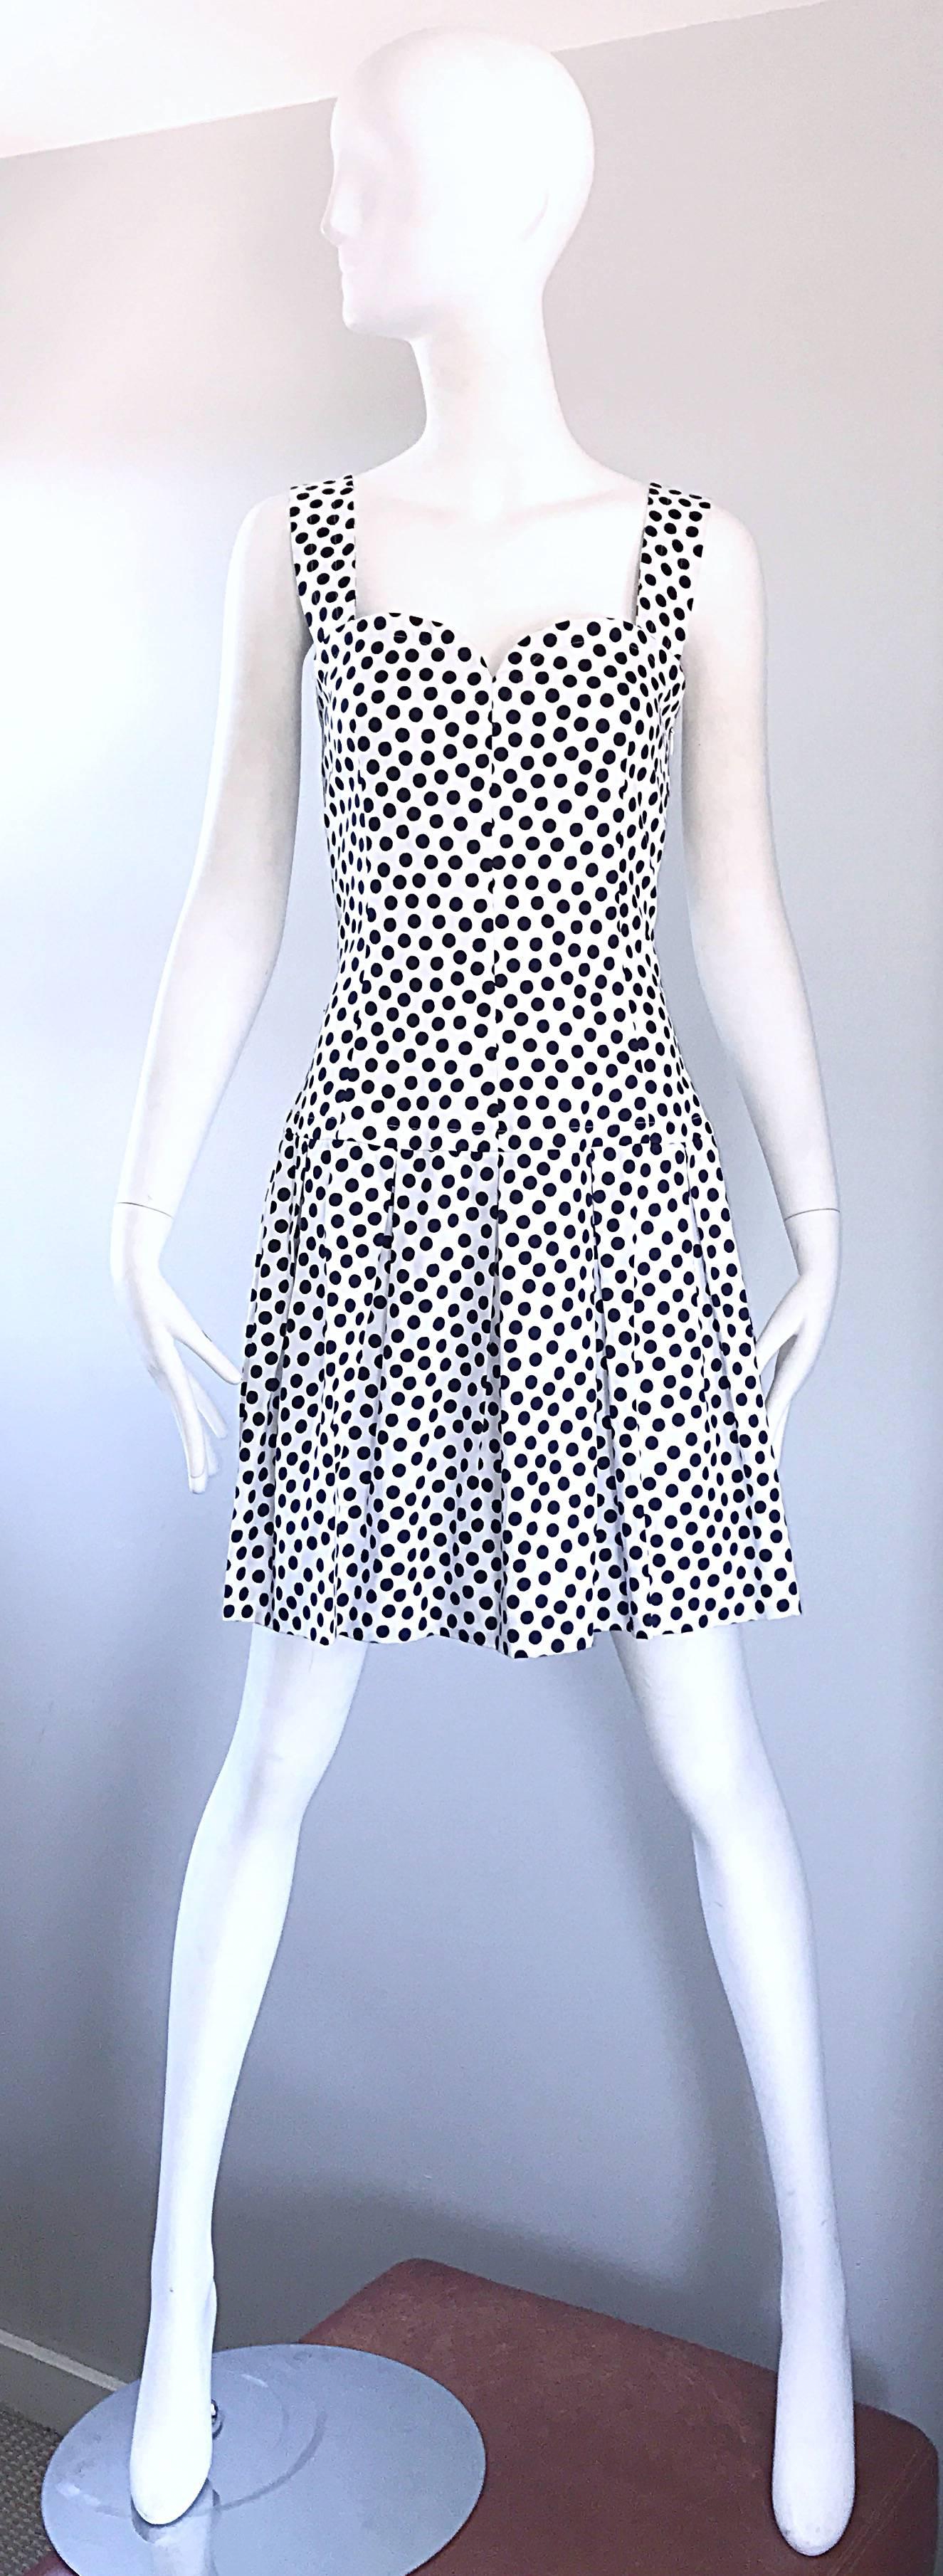 Chic 1990s ALEXANDER MCQUEEN for GIVENCHY COUTURE navy blue and white polka dot cotton dress! Features a fitted bodice, with a ruffled skirt. Hidden zipper up the side with hook-and-eye closure. Extremely well made, with heavy attention to detail.